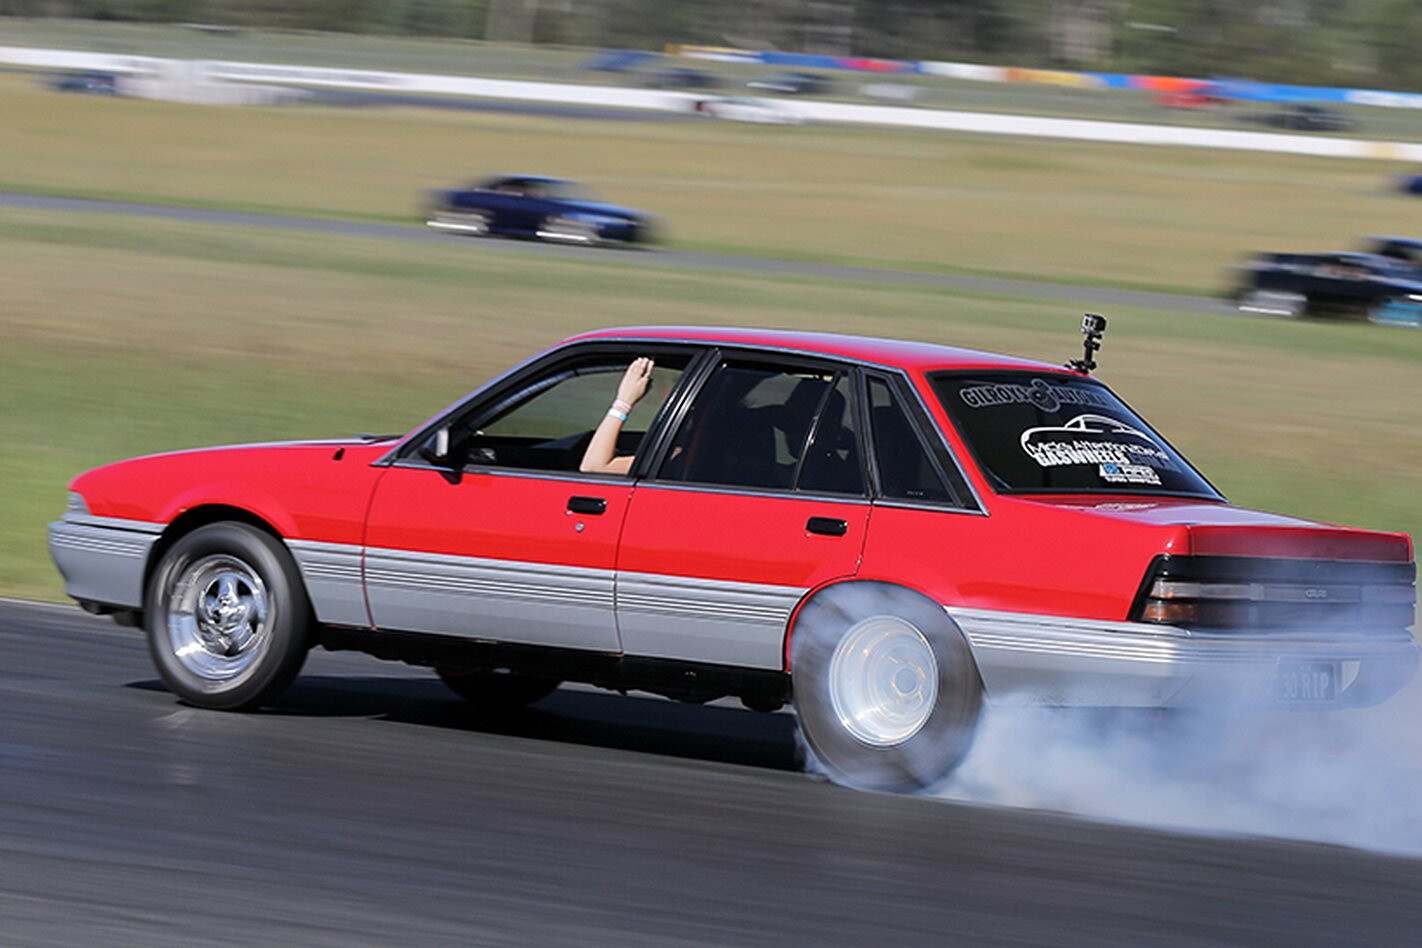 VIDEO: FORD-POWERED VL CALAIS RUNS EIGHTS – IT’S NUTS!